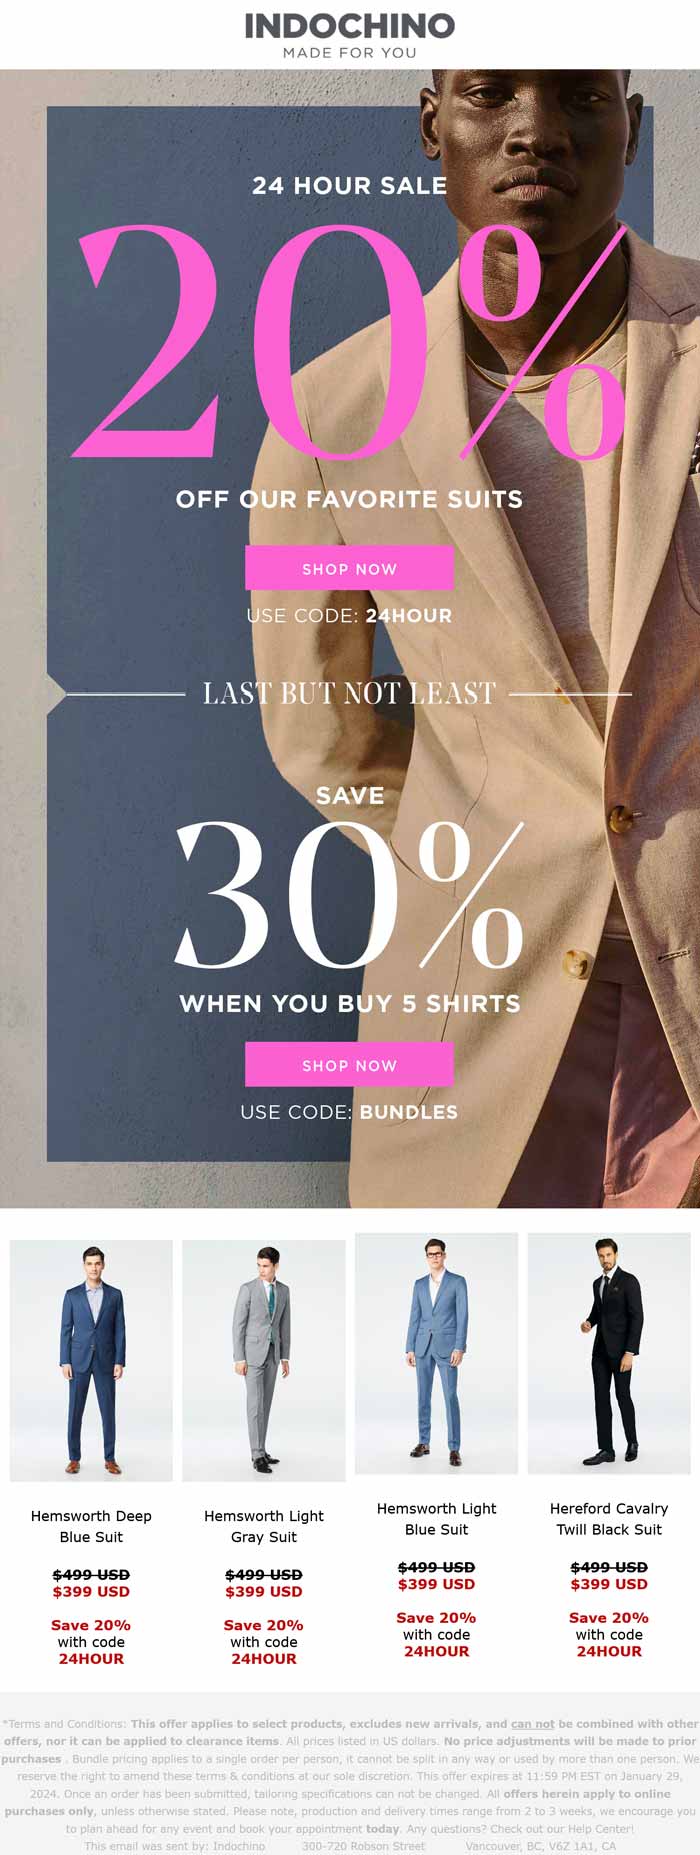 20% off suits today at Indochino via promo code 24HOUR #indochino